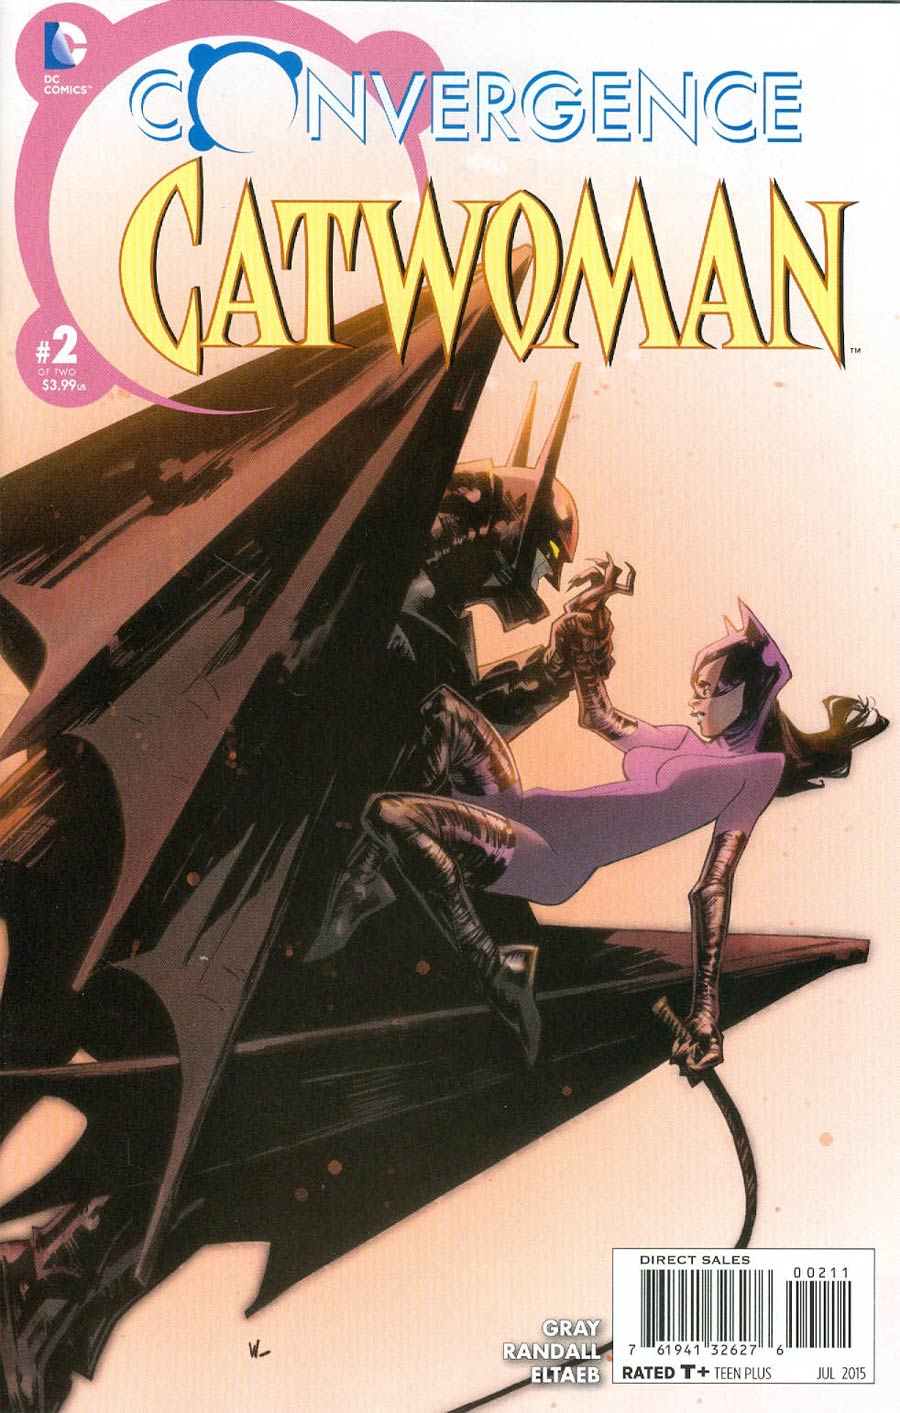 Convergence Catwoman #2 Cover A Regular Claire Wendling Cover